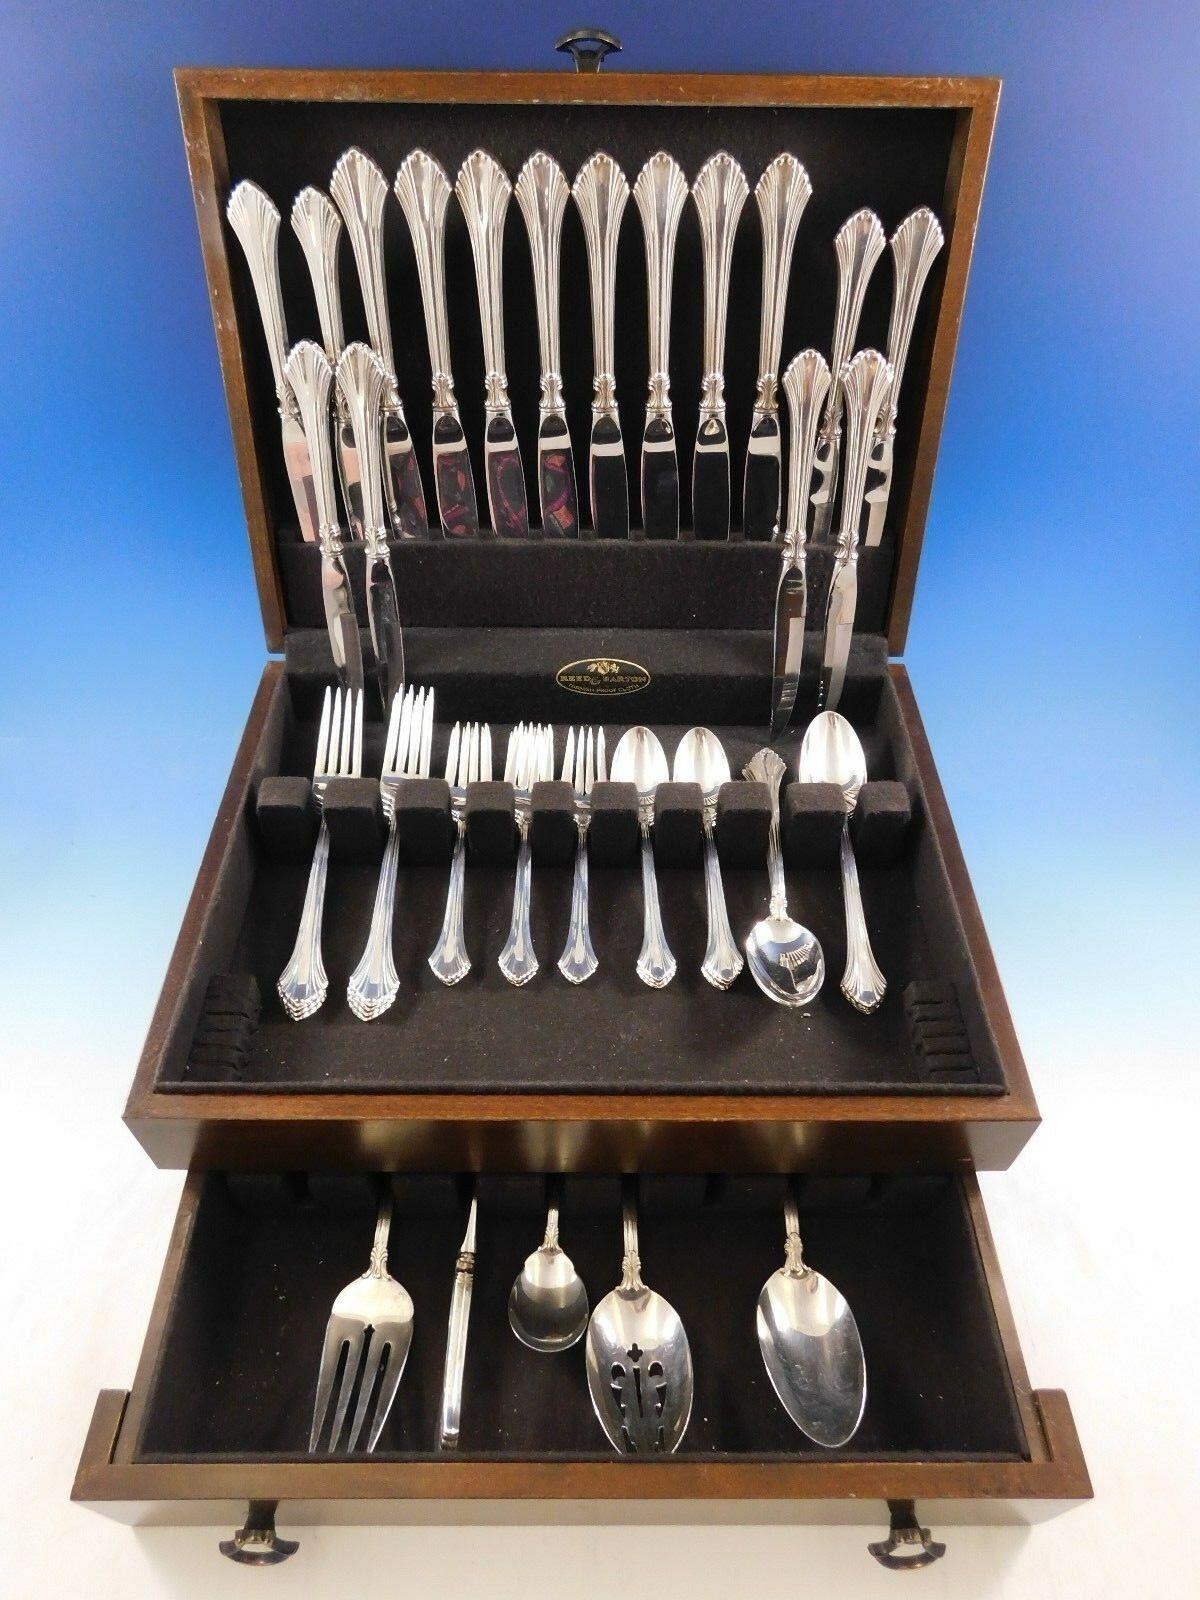 Dinner size French Regency by Wallace sterling silver flatware set, 53 pieces. This set includes:

8 dinner knives, 9 3/4